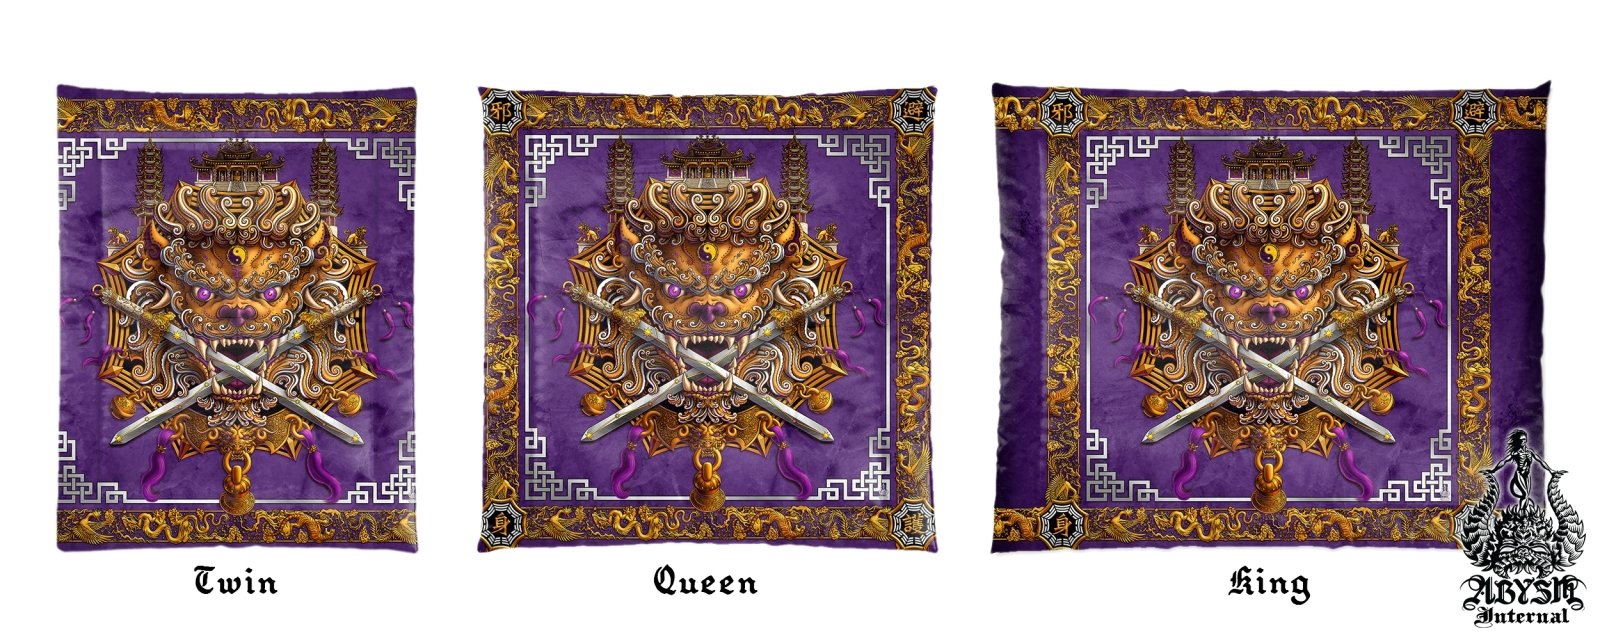 Asian Lion Bedding Set, Comforter and Duvet, Taiwan Sword Lion, Chinese Bed Cover, Gamer Bedroom, Indie Decor, King, Queen and Twin Size - Purple White & Gold - Abysm Internal